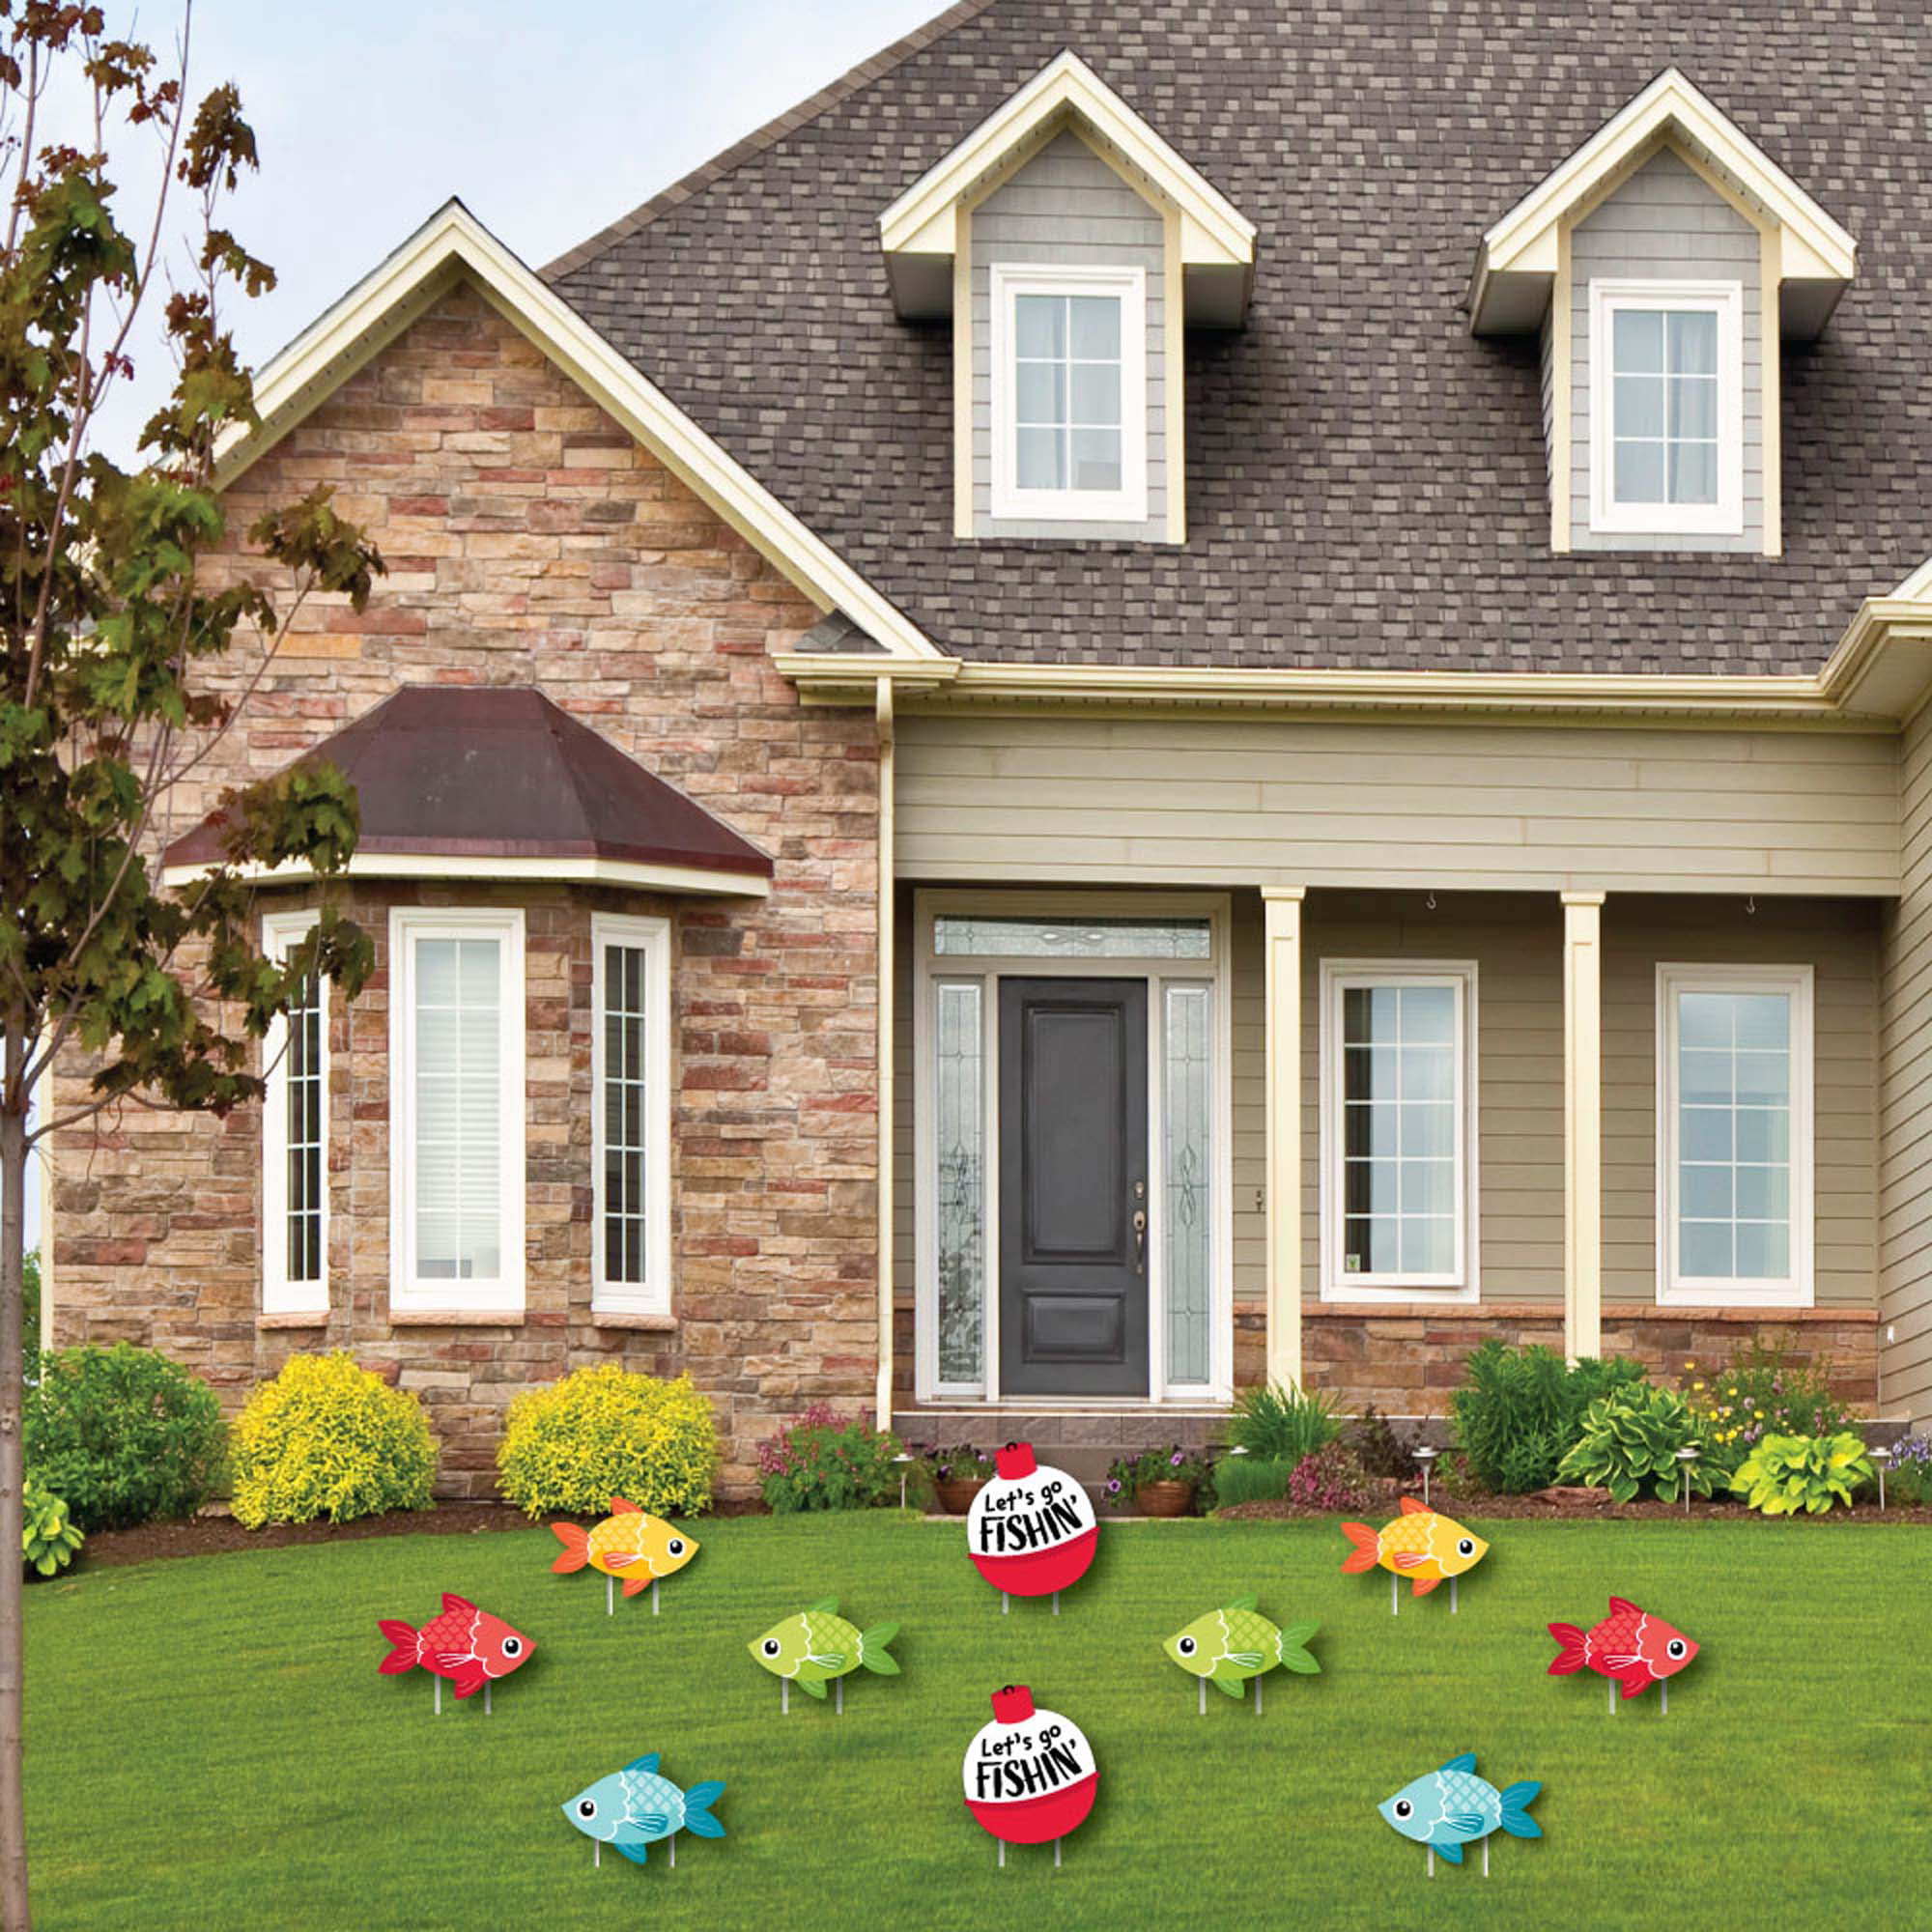 Big Dot of Happiness Let's Go Fishing - Bobber Lawn Decorations